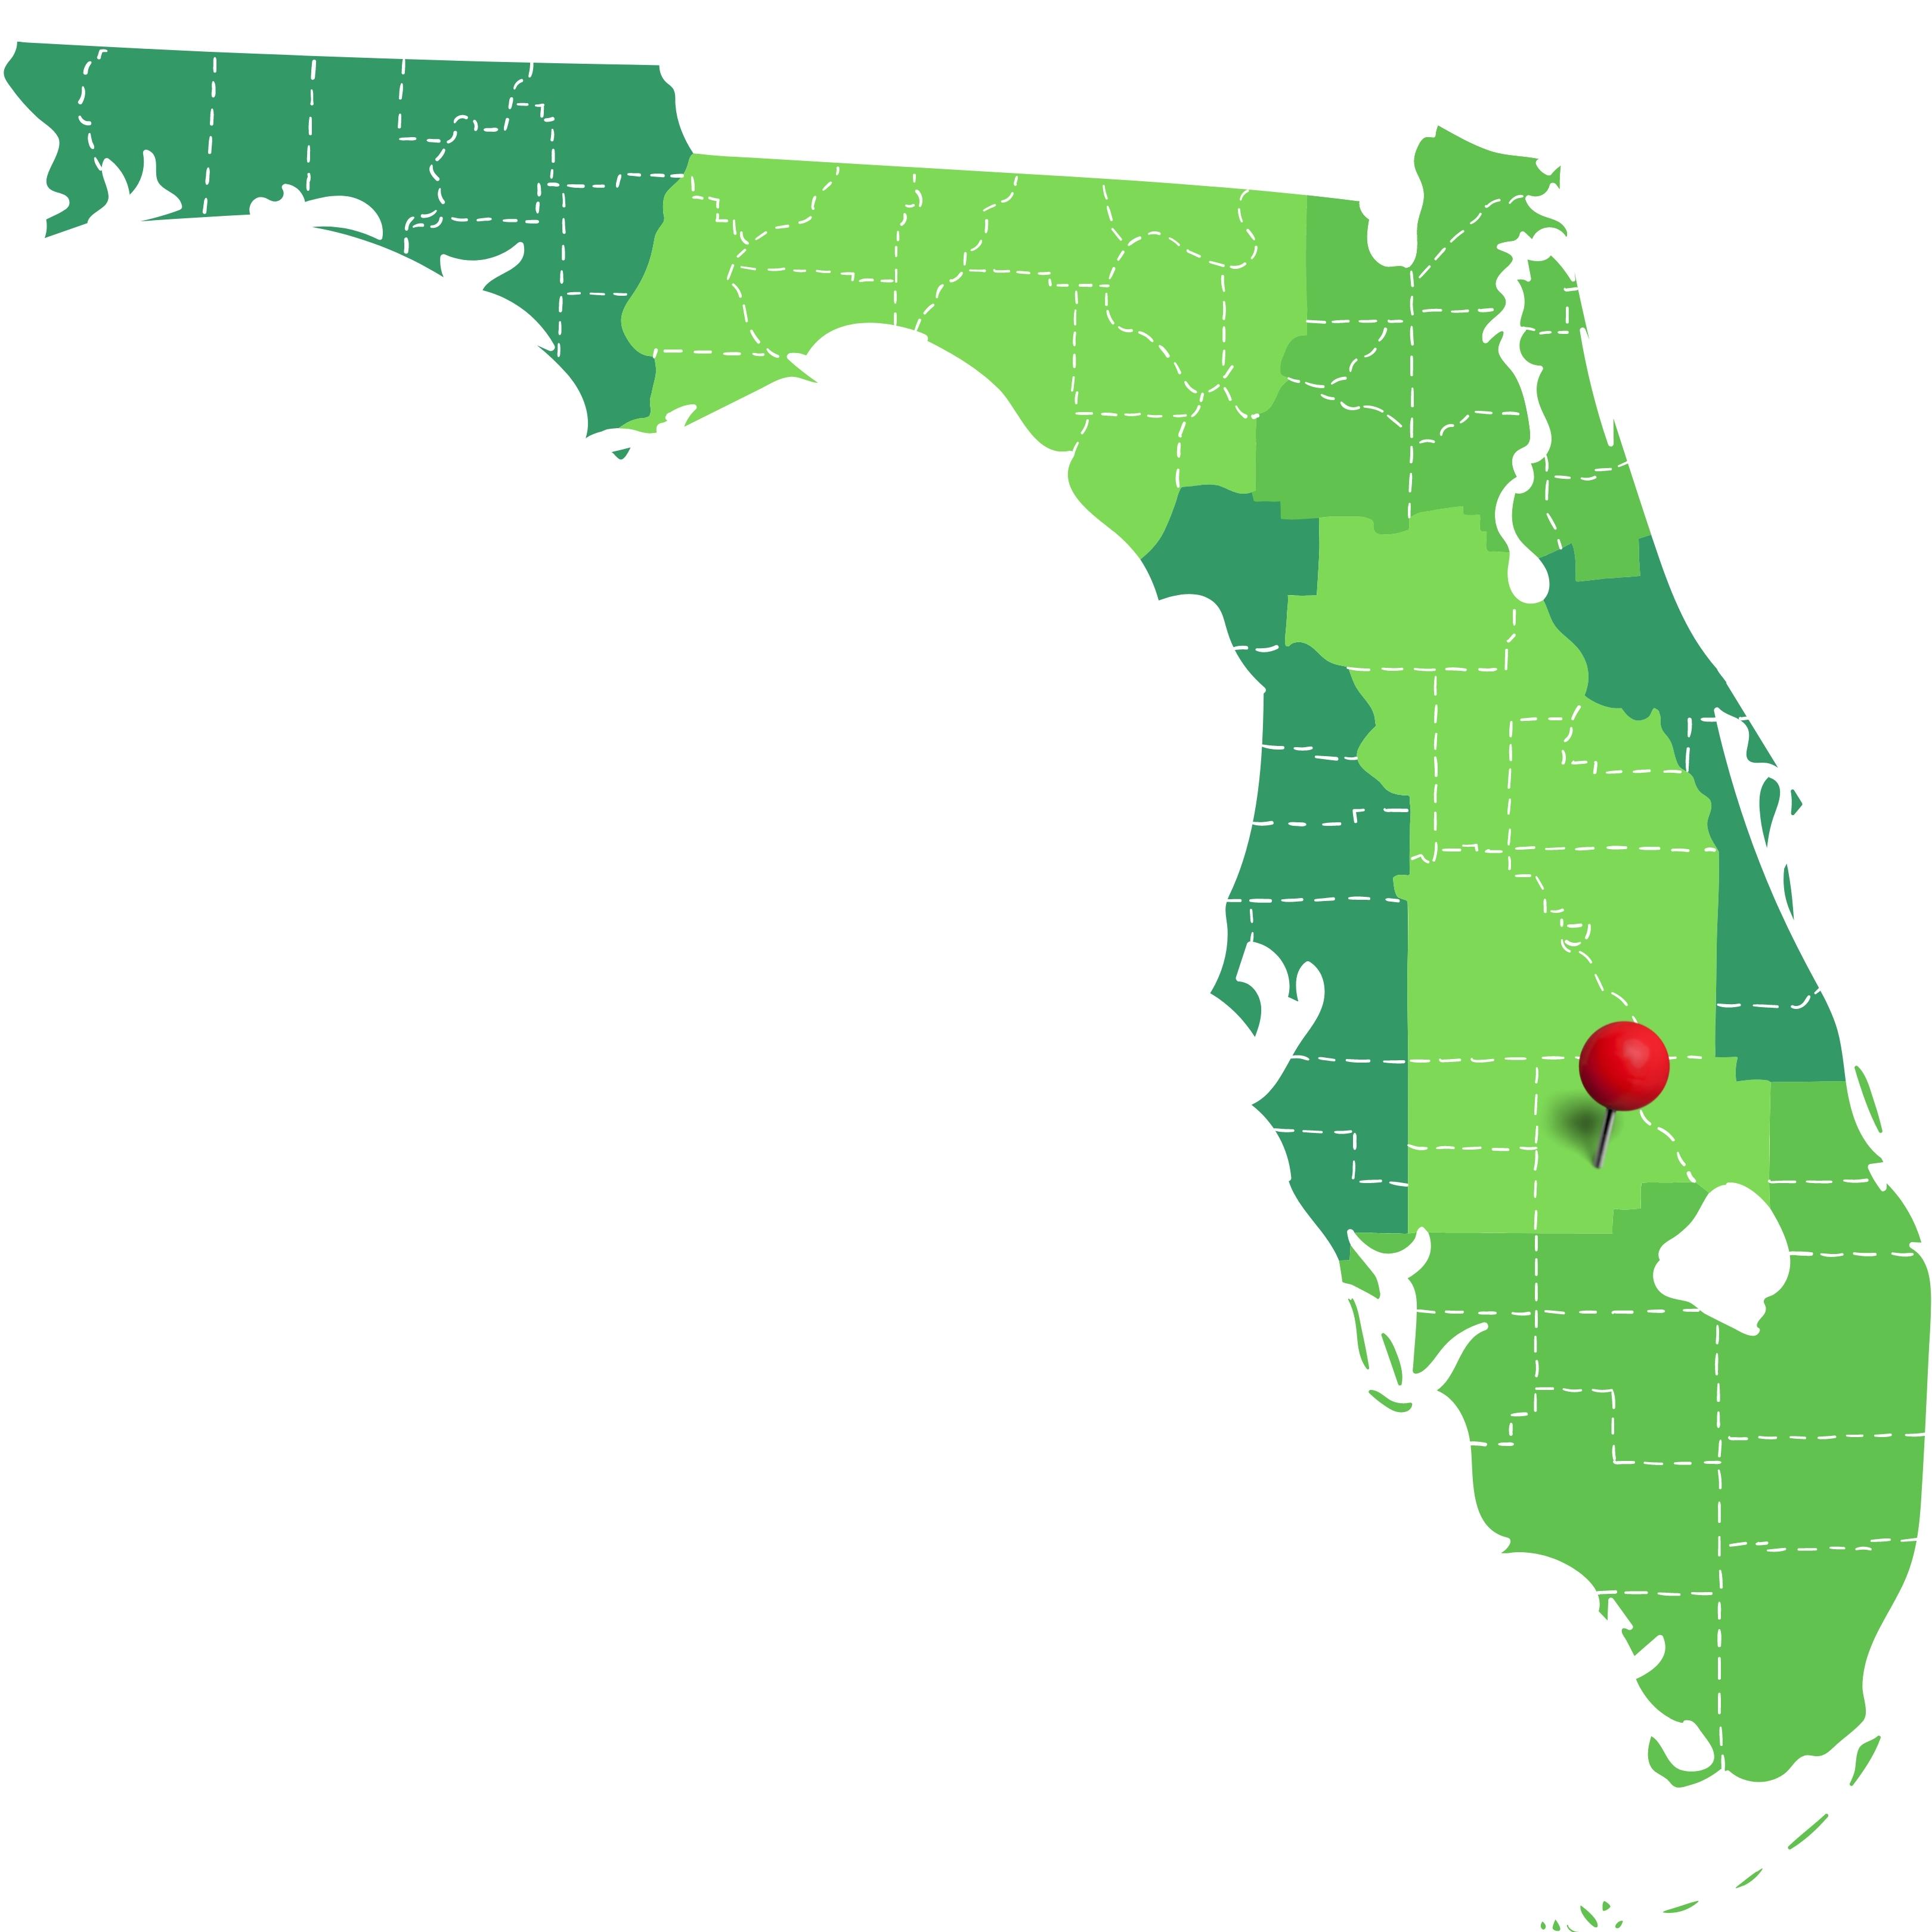 Florida graphic with a pinpoint locating Camp Cloverleaf